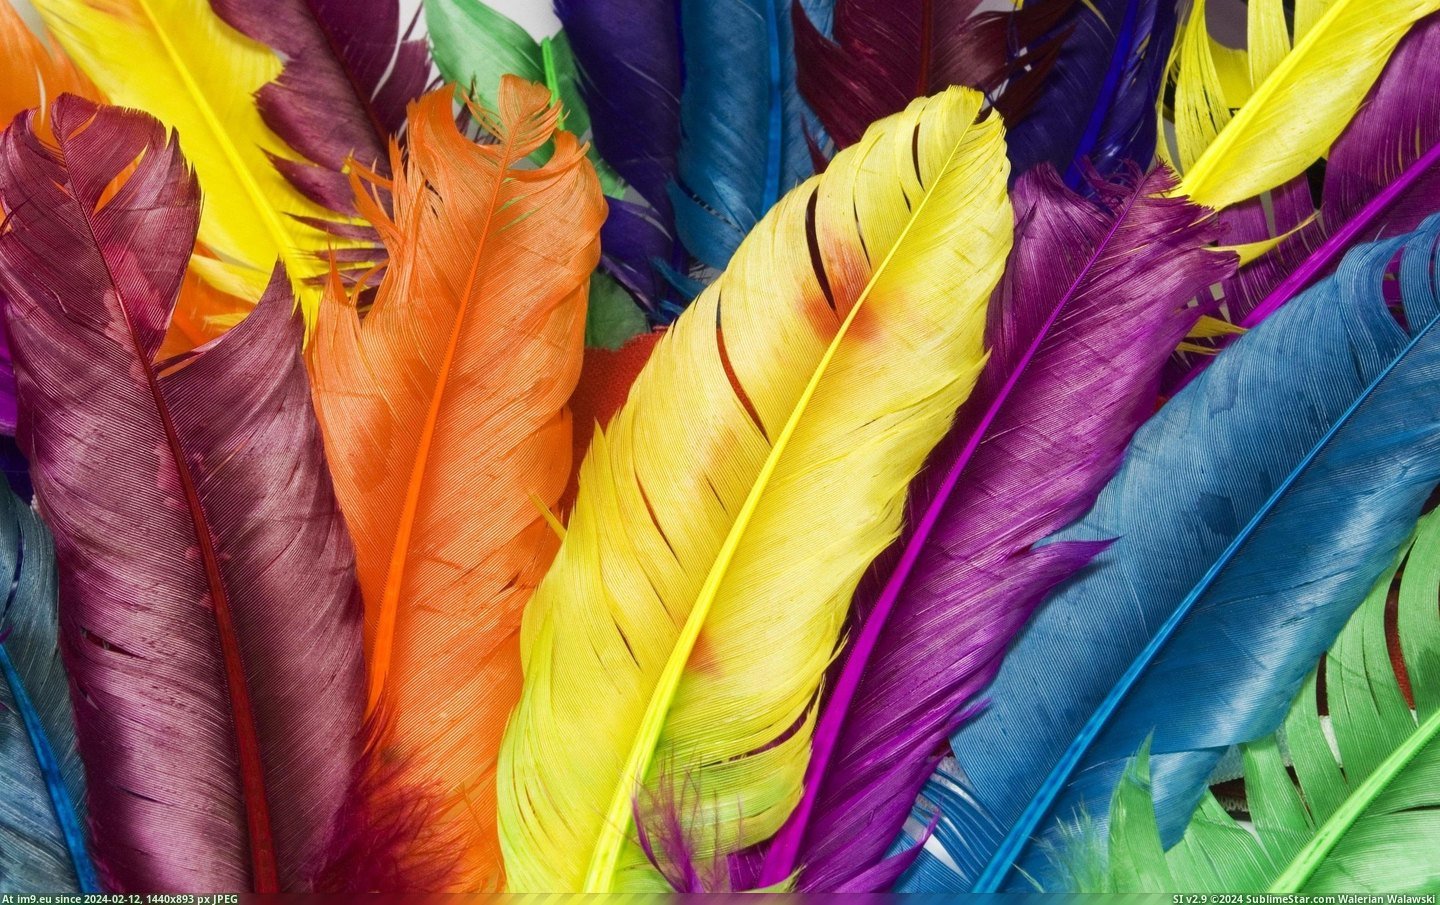 #Wallpaper #Beautiful #Feathers #Wide #Colors Feathers In Colors Wide HD Wallpaper Pic. (Image of album Unique HD Wallpapers))